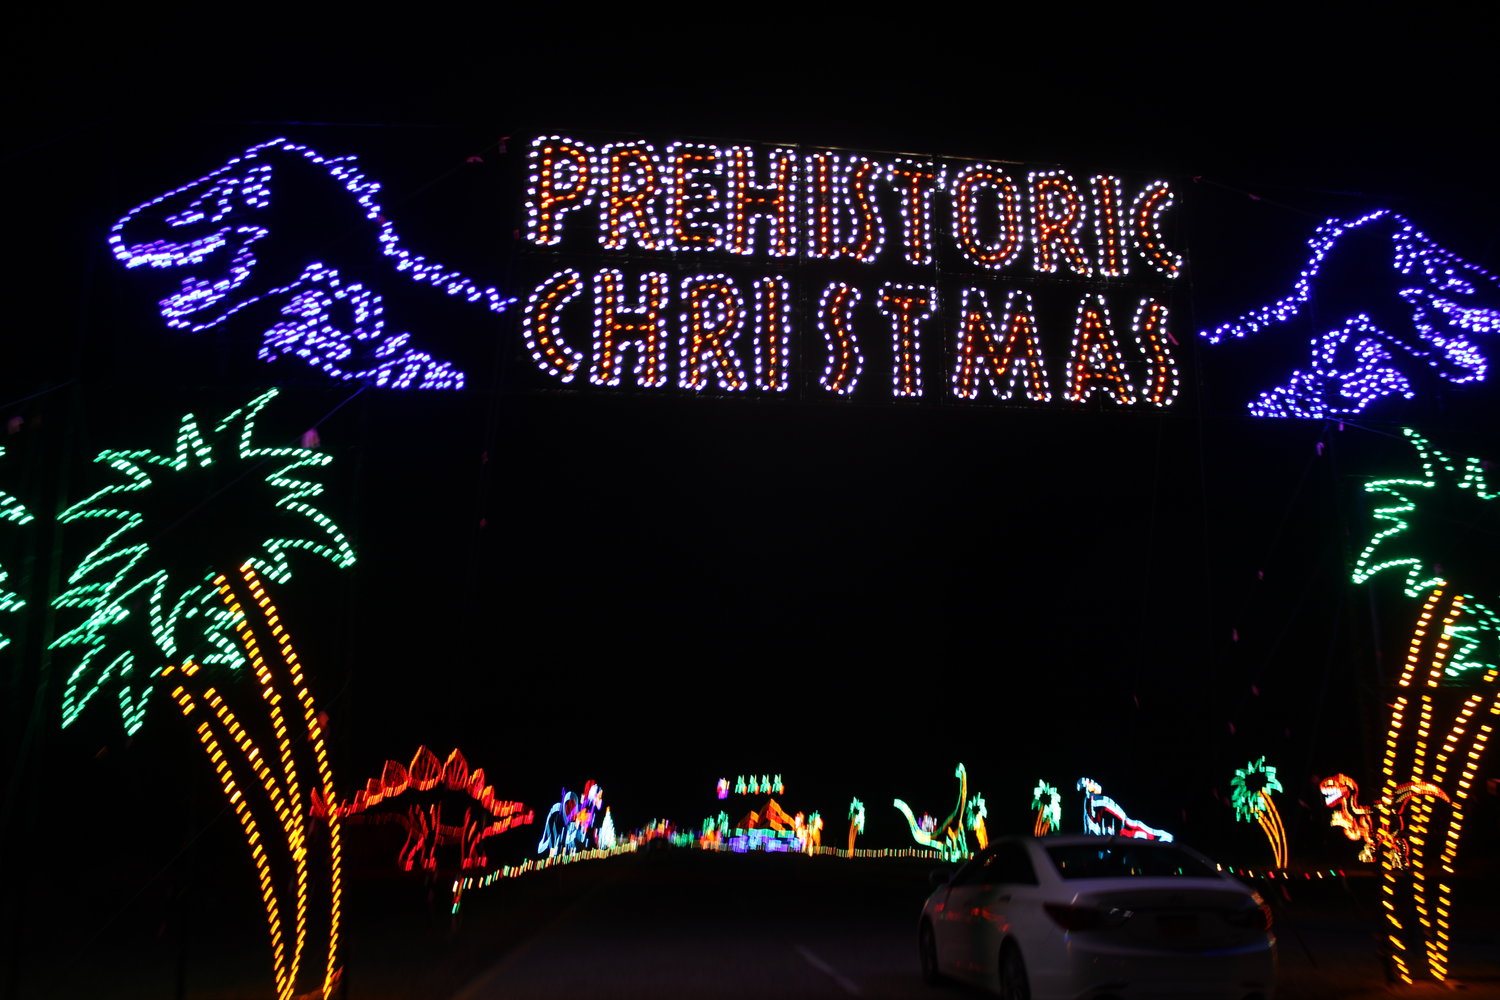 A prehistoric era section in the Magic of Lights holiday display at Jones Beach State Park features dinosaurs decorating for the holidays.